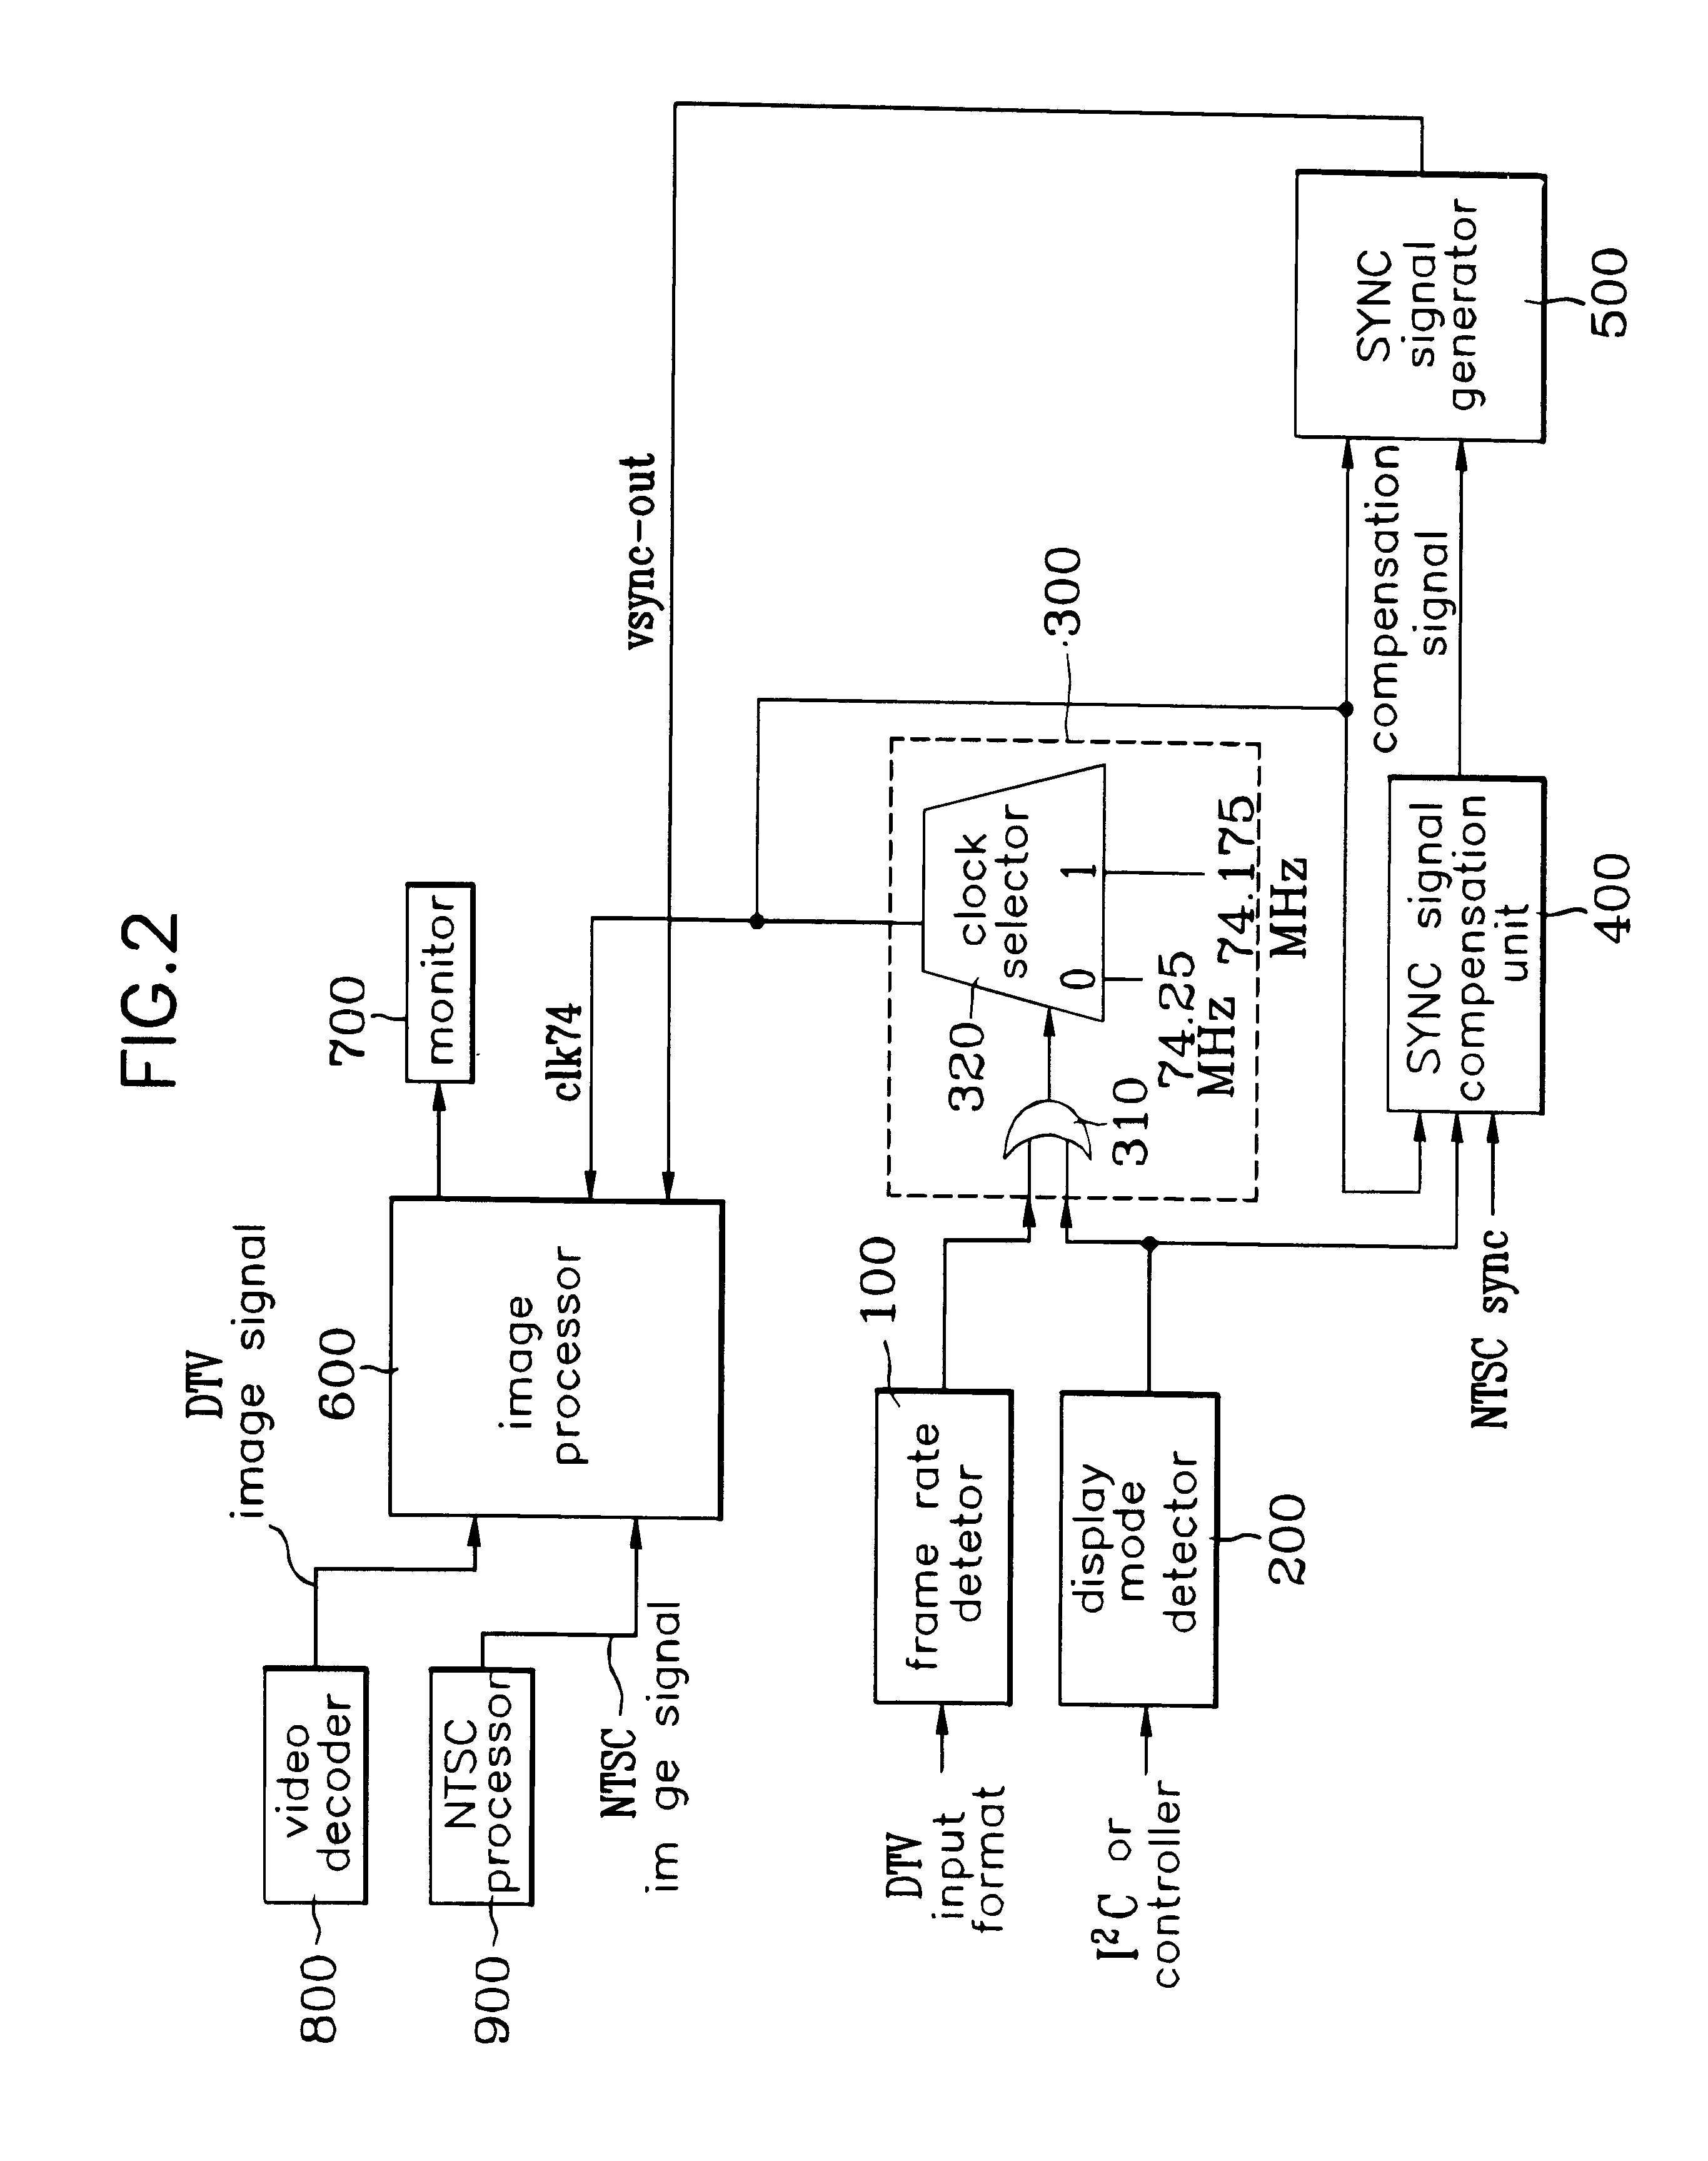 Sync signal generating apparatus and method for a video signal processor